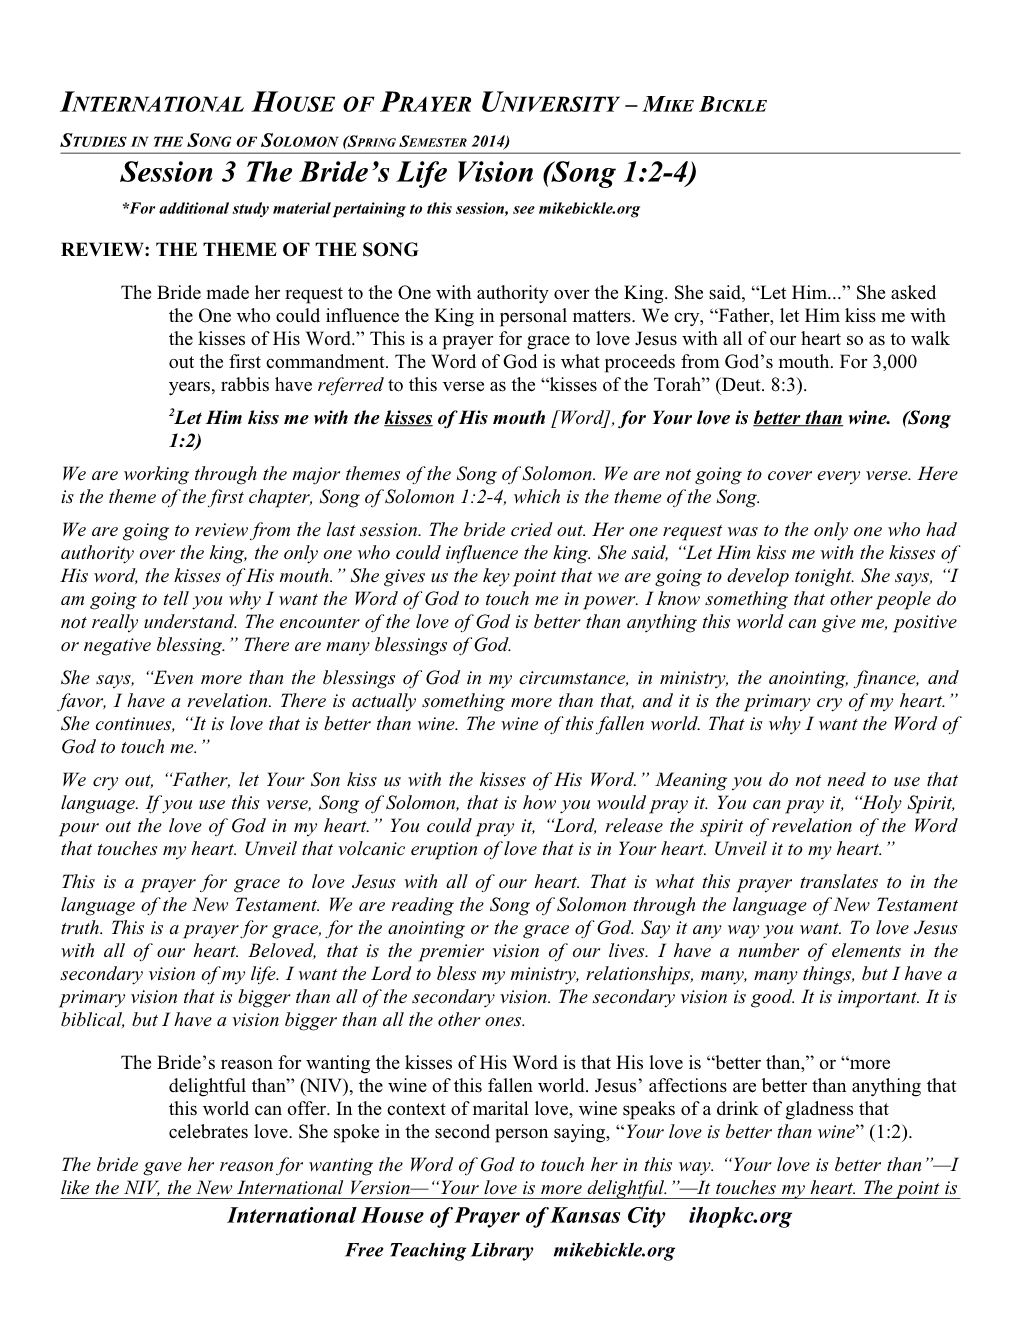 Session 3 the Bride S Life Vision (Song 1:2-4)